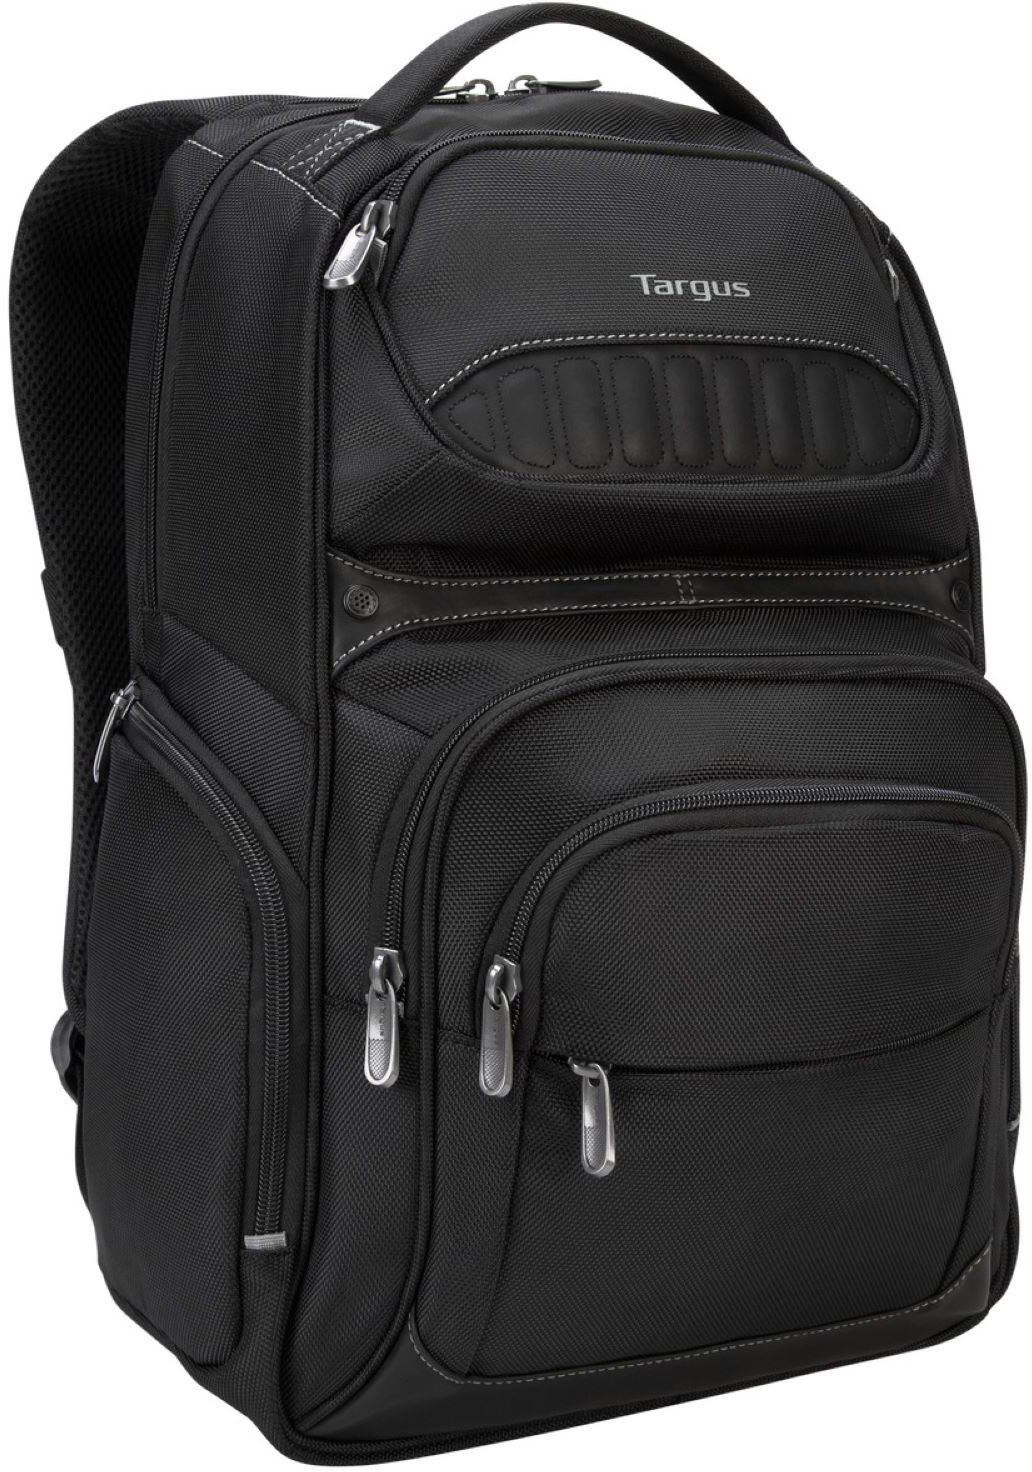 Angle View: Solo New York - Classic Rolling Laptop Case - Black